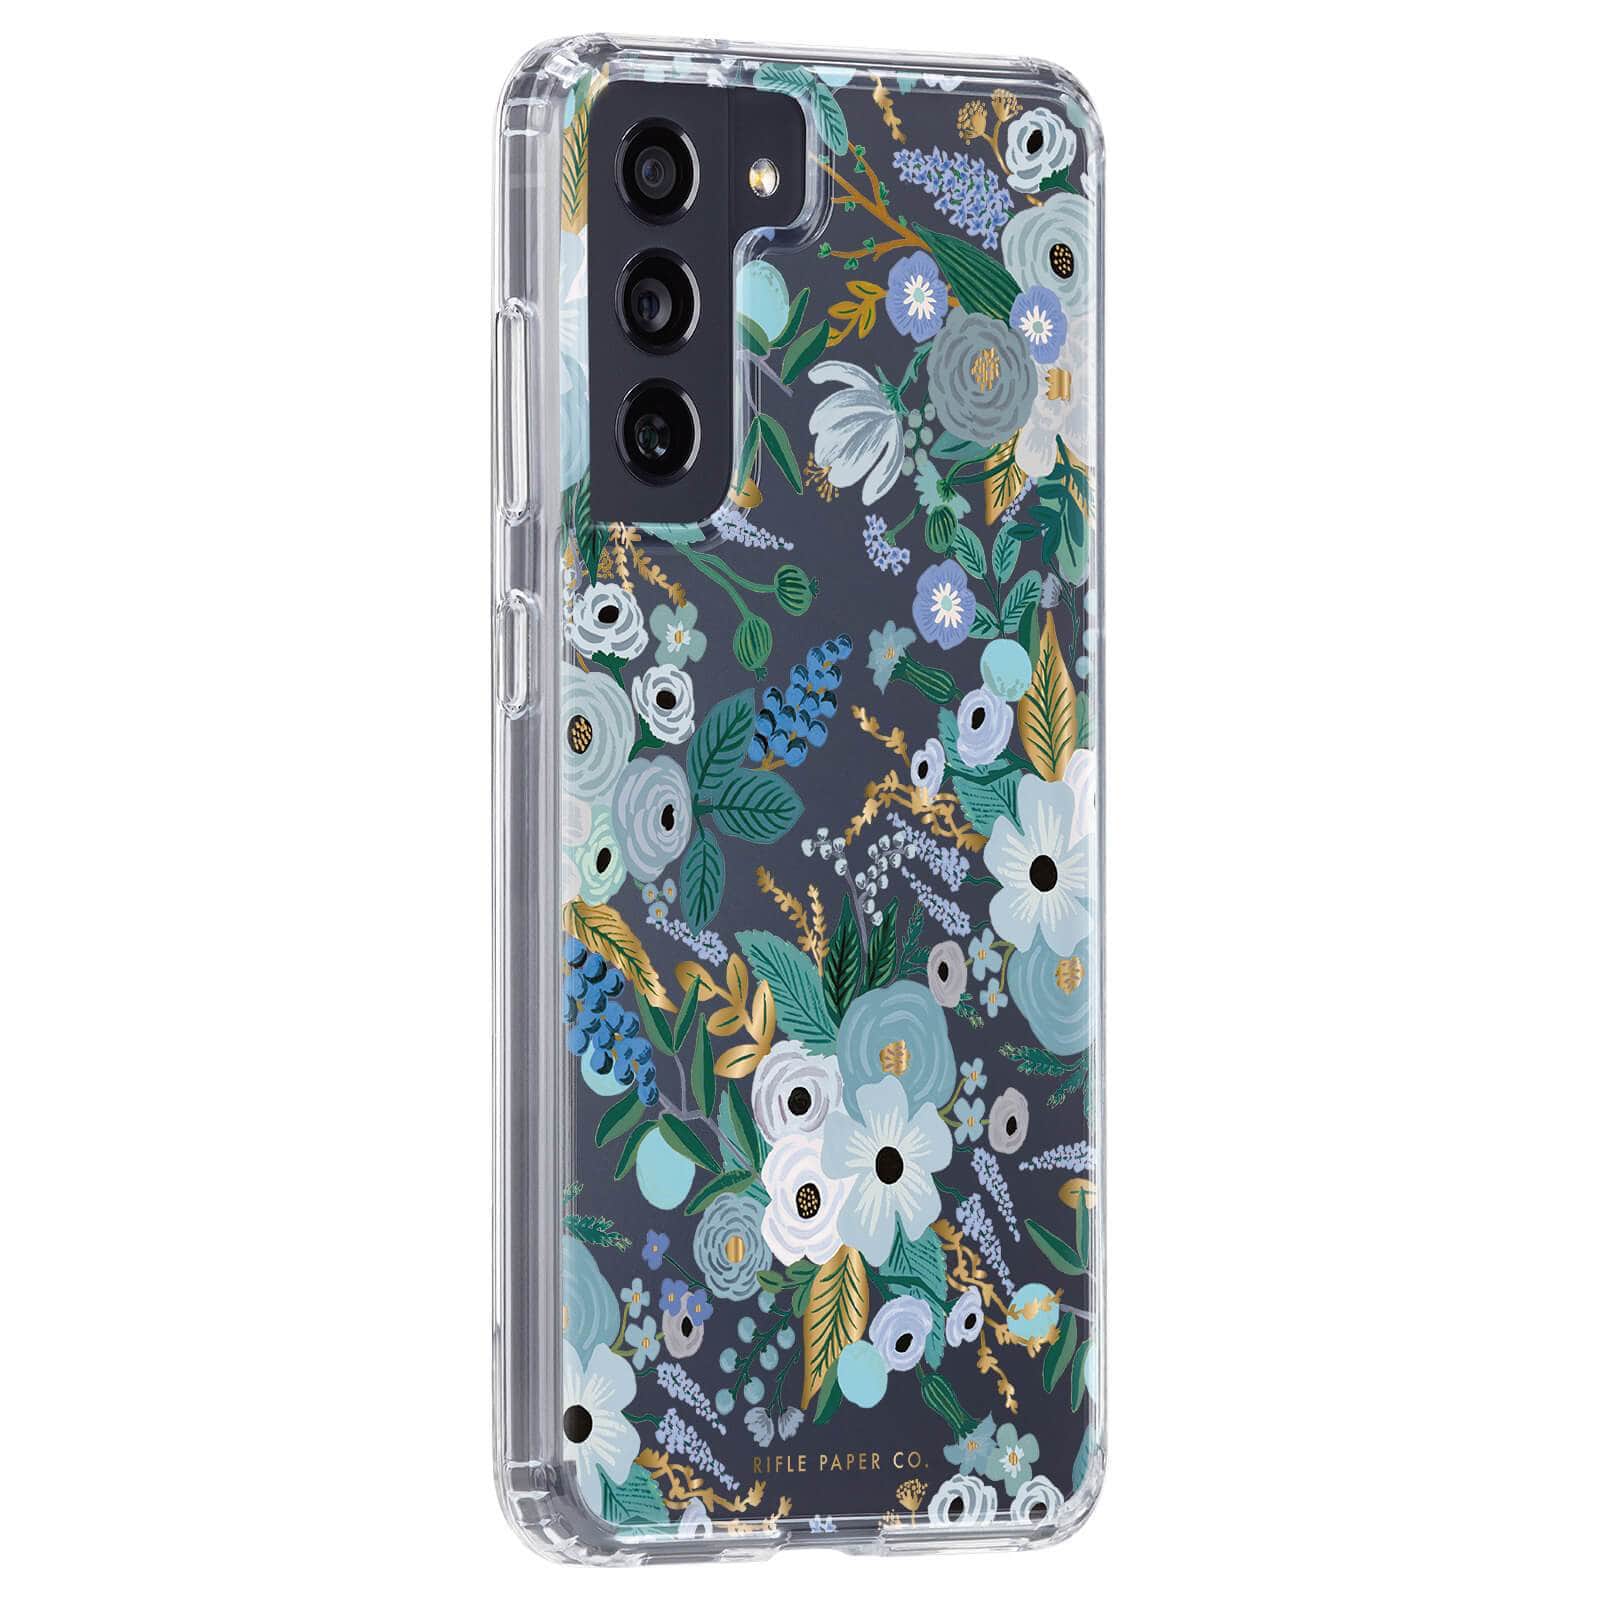 Samsung Galaxy S21 FE 5G case with blue Rifle Paper Co. print. color::Garden Party Blue